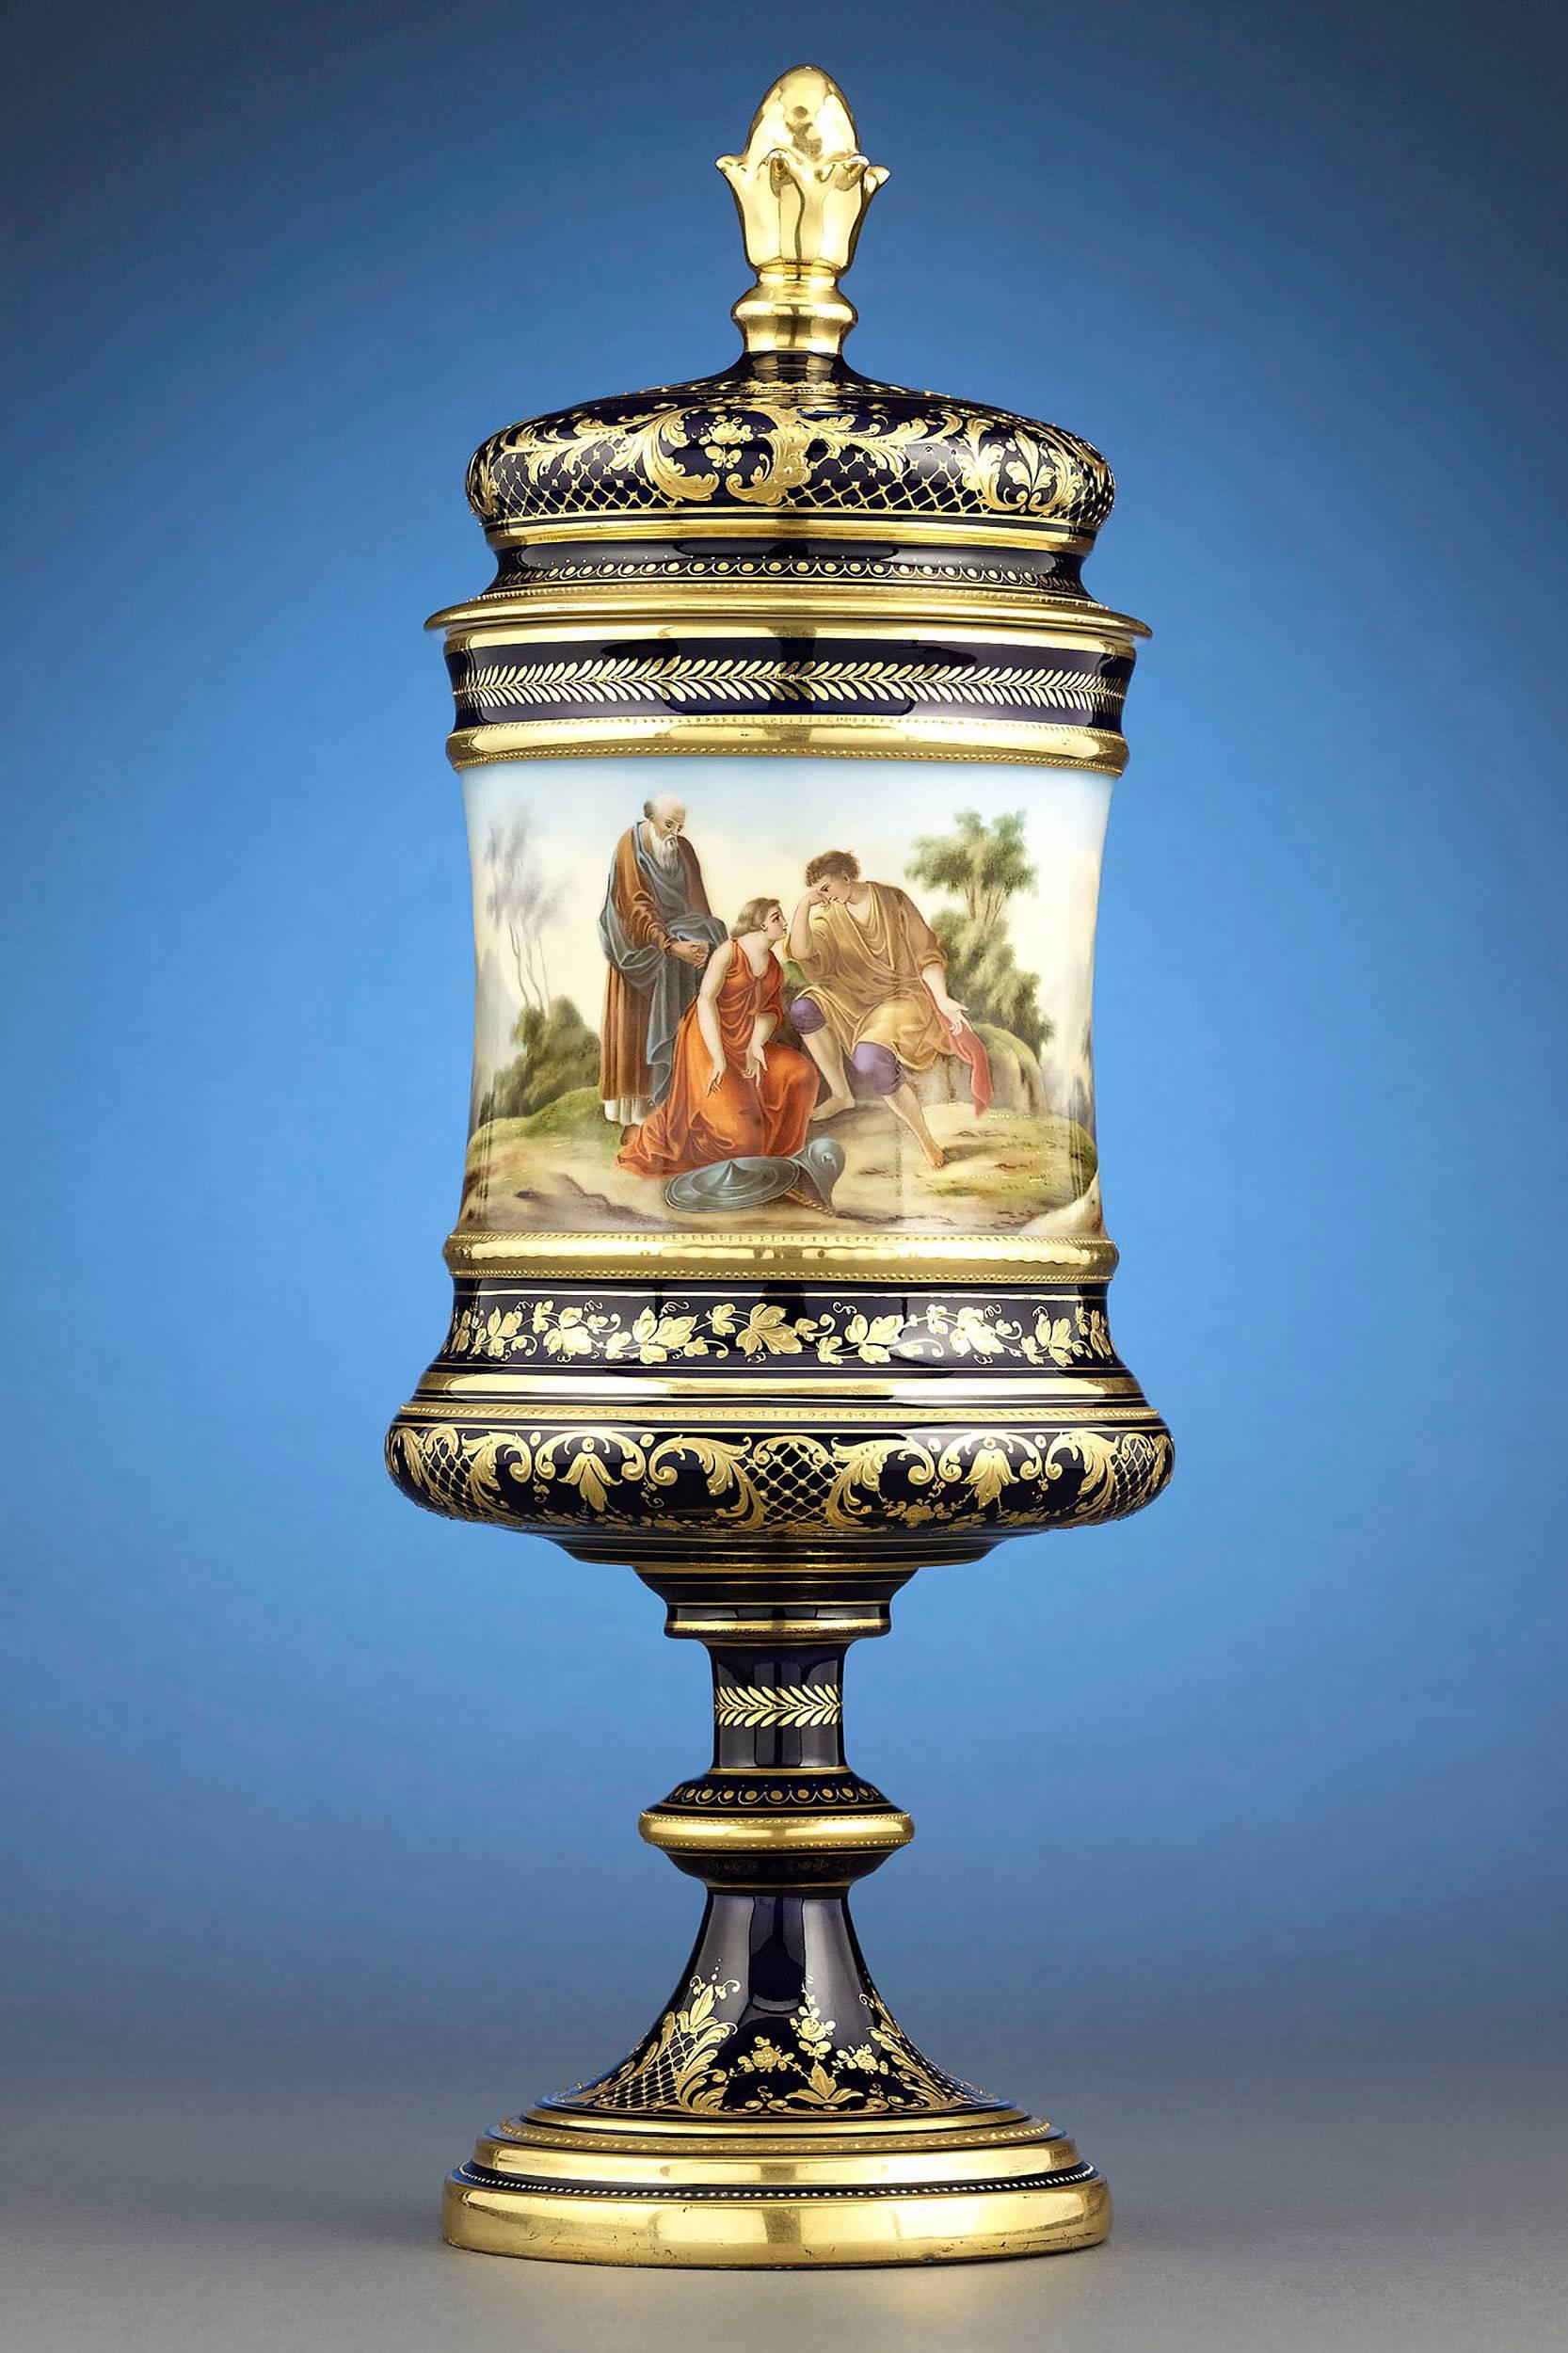 A beautiful Royal Vienna Porcelain urn showcasing the firms renowned rich, cobalt blue background contrasted by lush gilt accents. A classical figural scene wraps around the entire vessel, depicting Cupid being restrained from releasing another